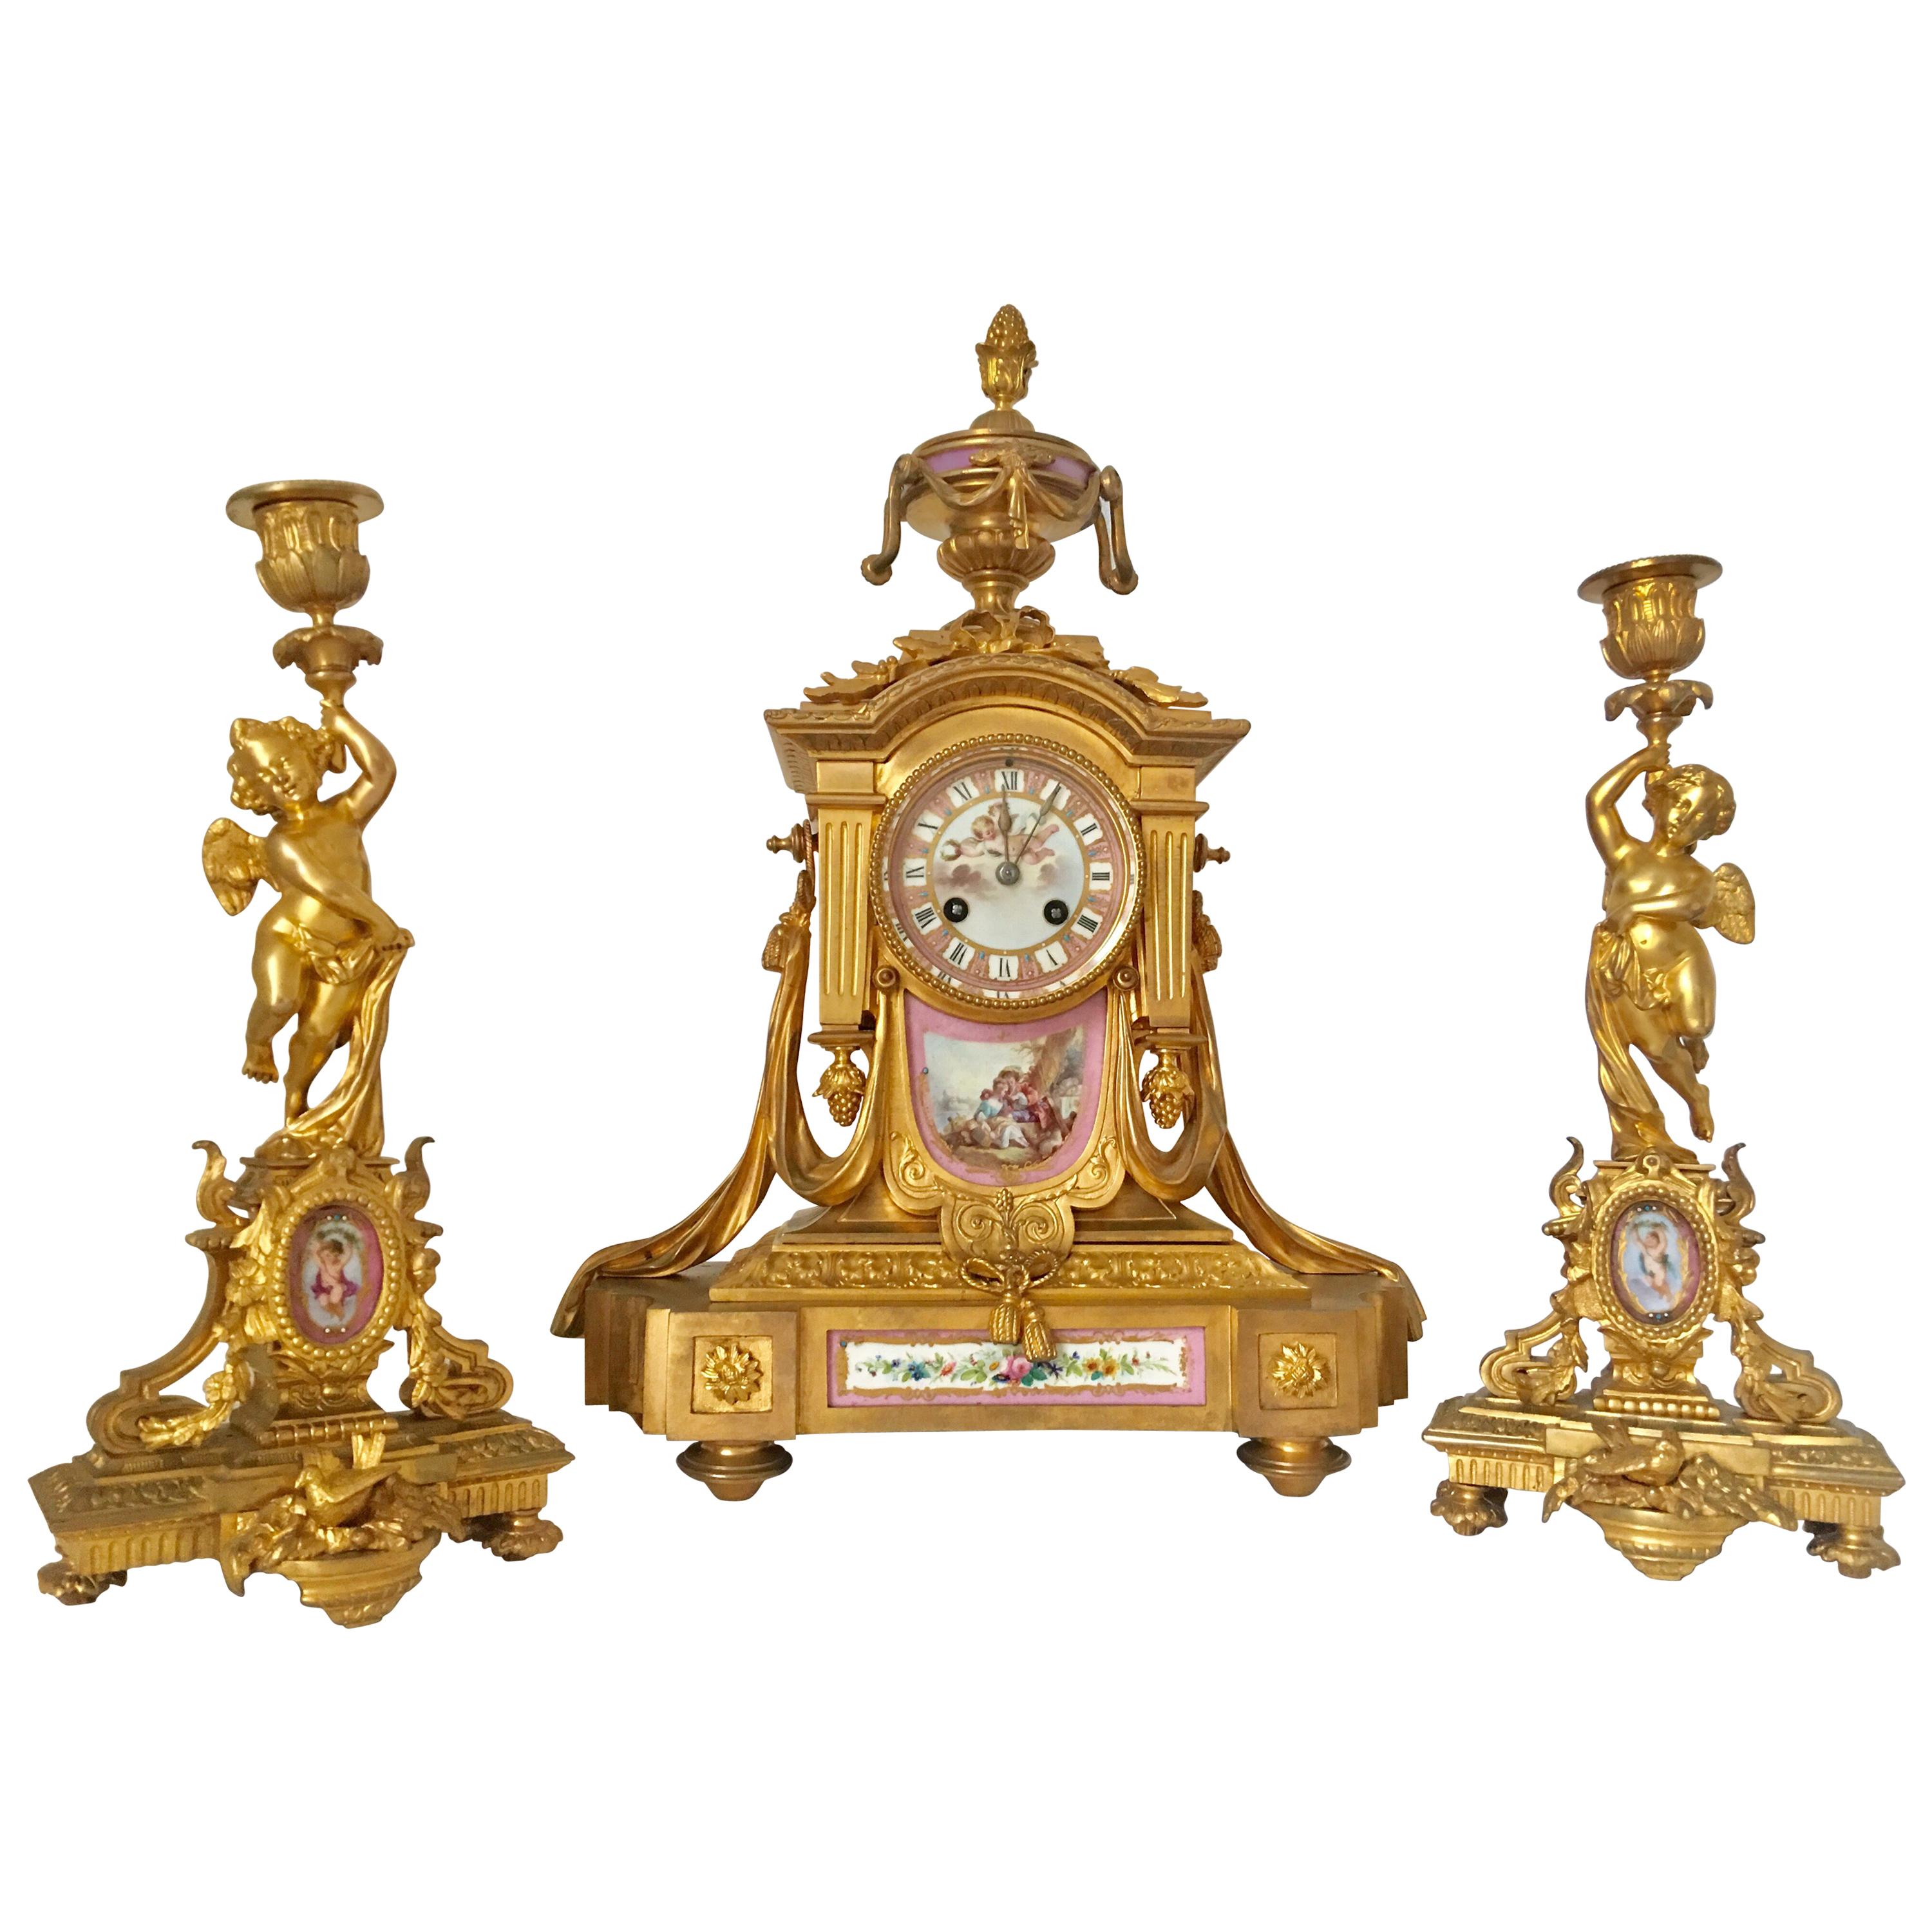 3pcs Set Porcelain Ormolu French Clock Signed Howell James & Co. “To the Queen” For Sale